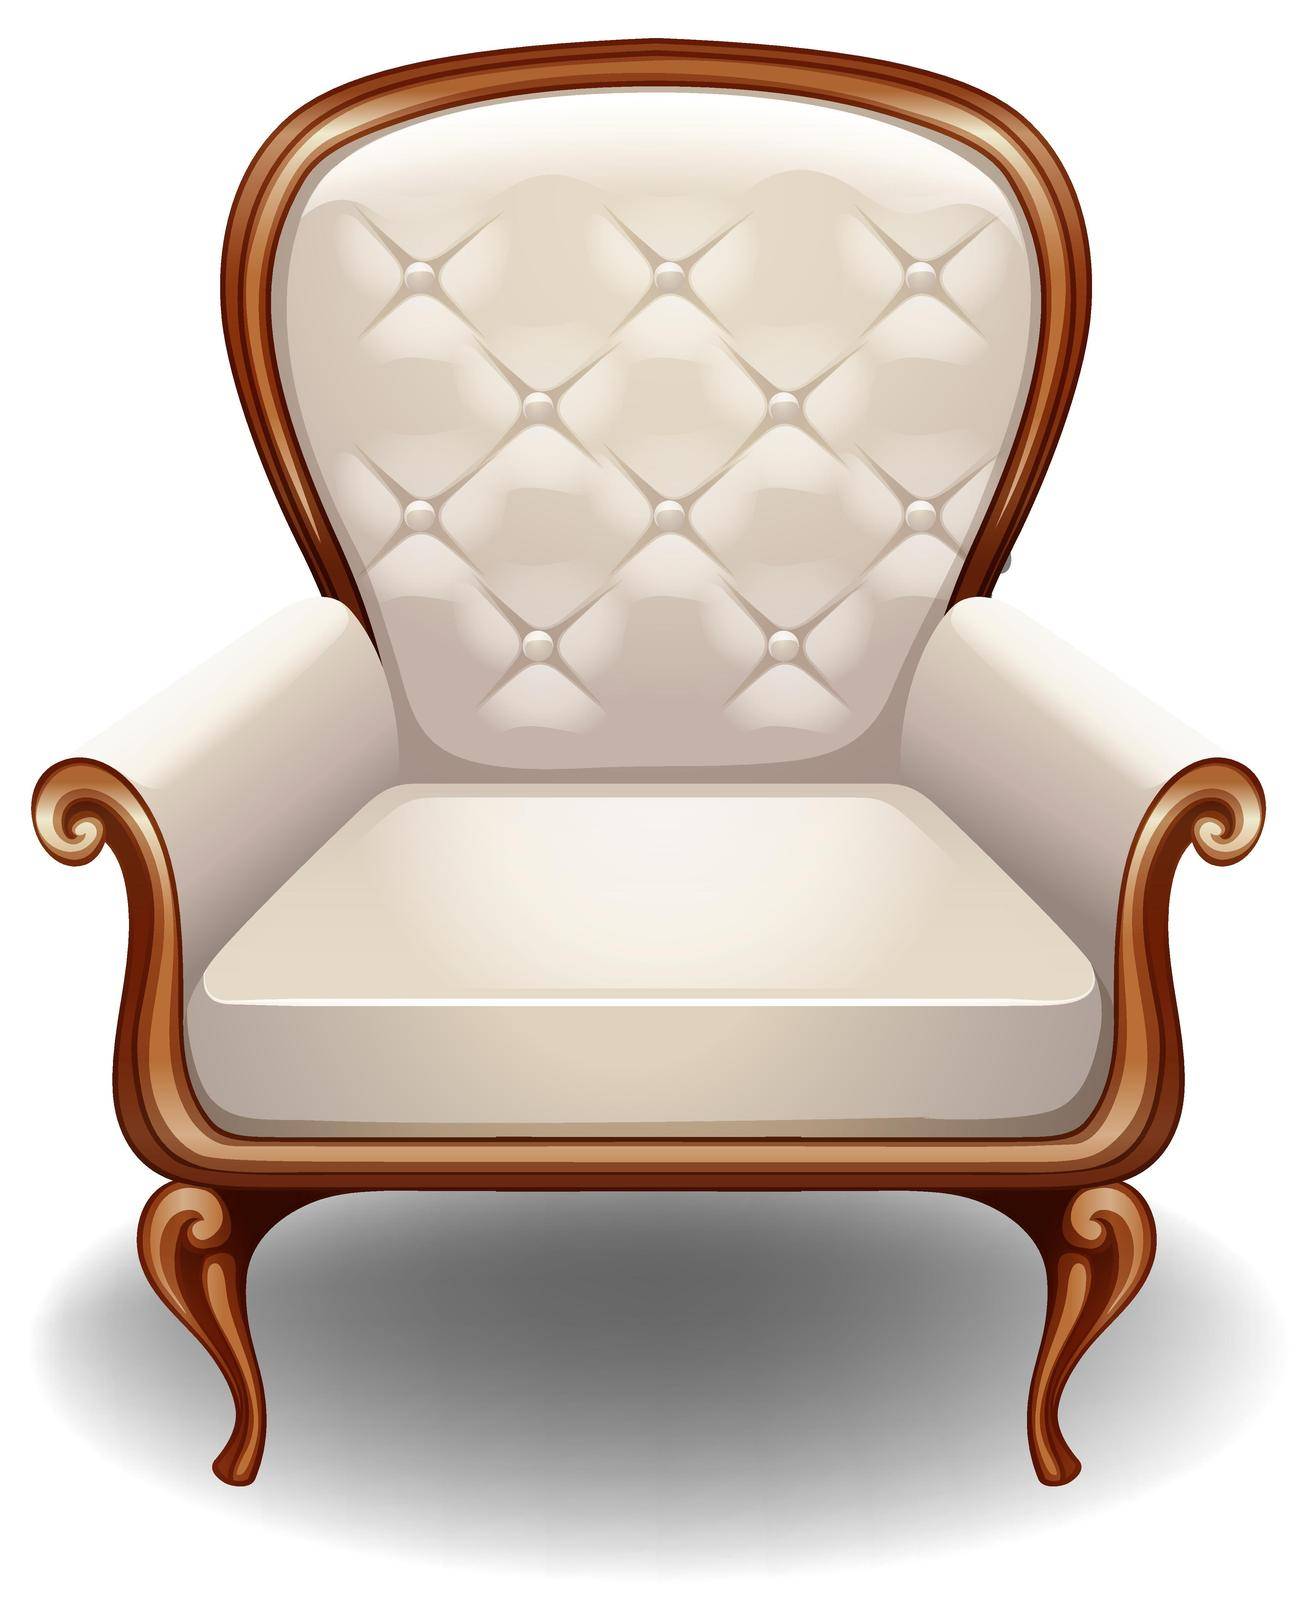 Pearl-white color armachair with bronze color border